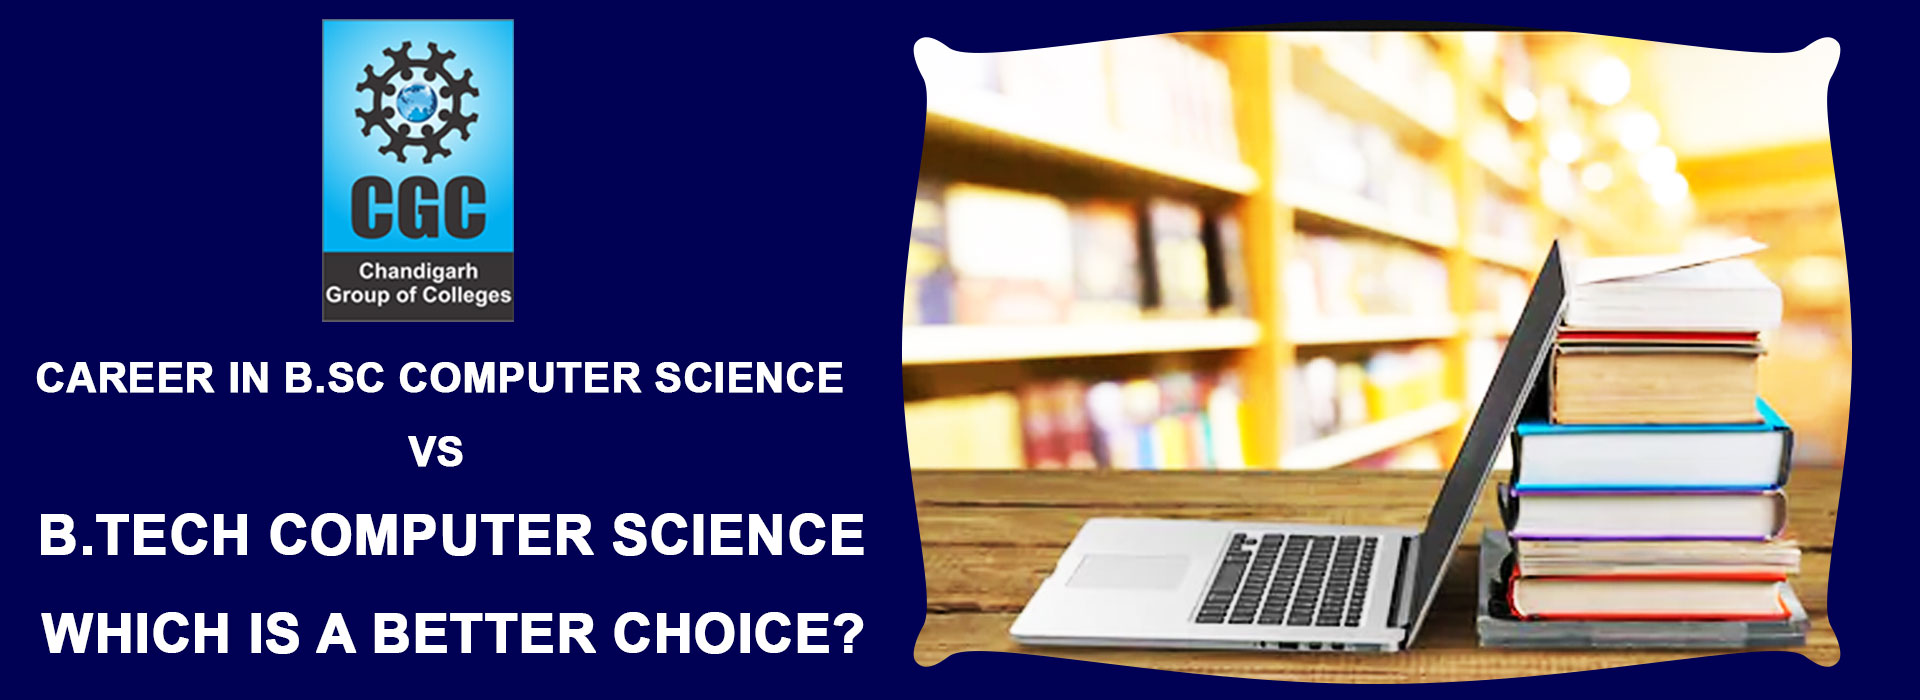 A career in B.Sc Computer Science Vs B.Tech Computer Science - Which is a Better Choice? 